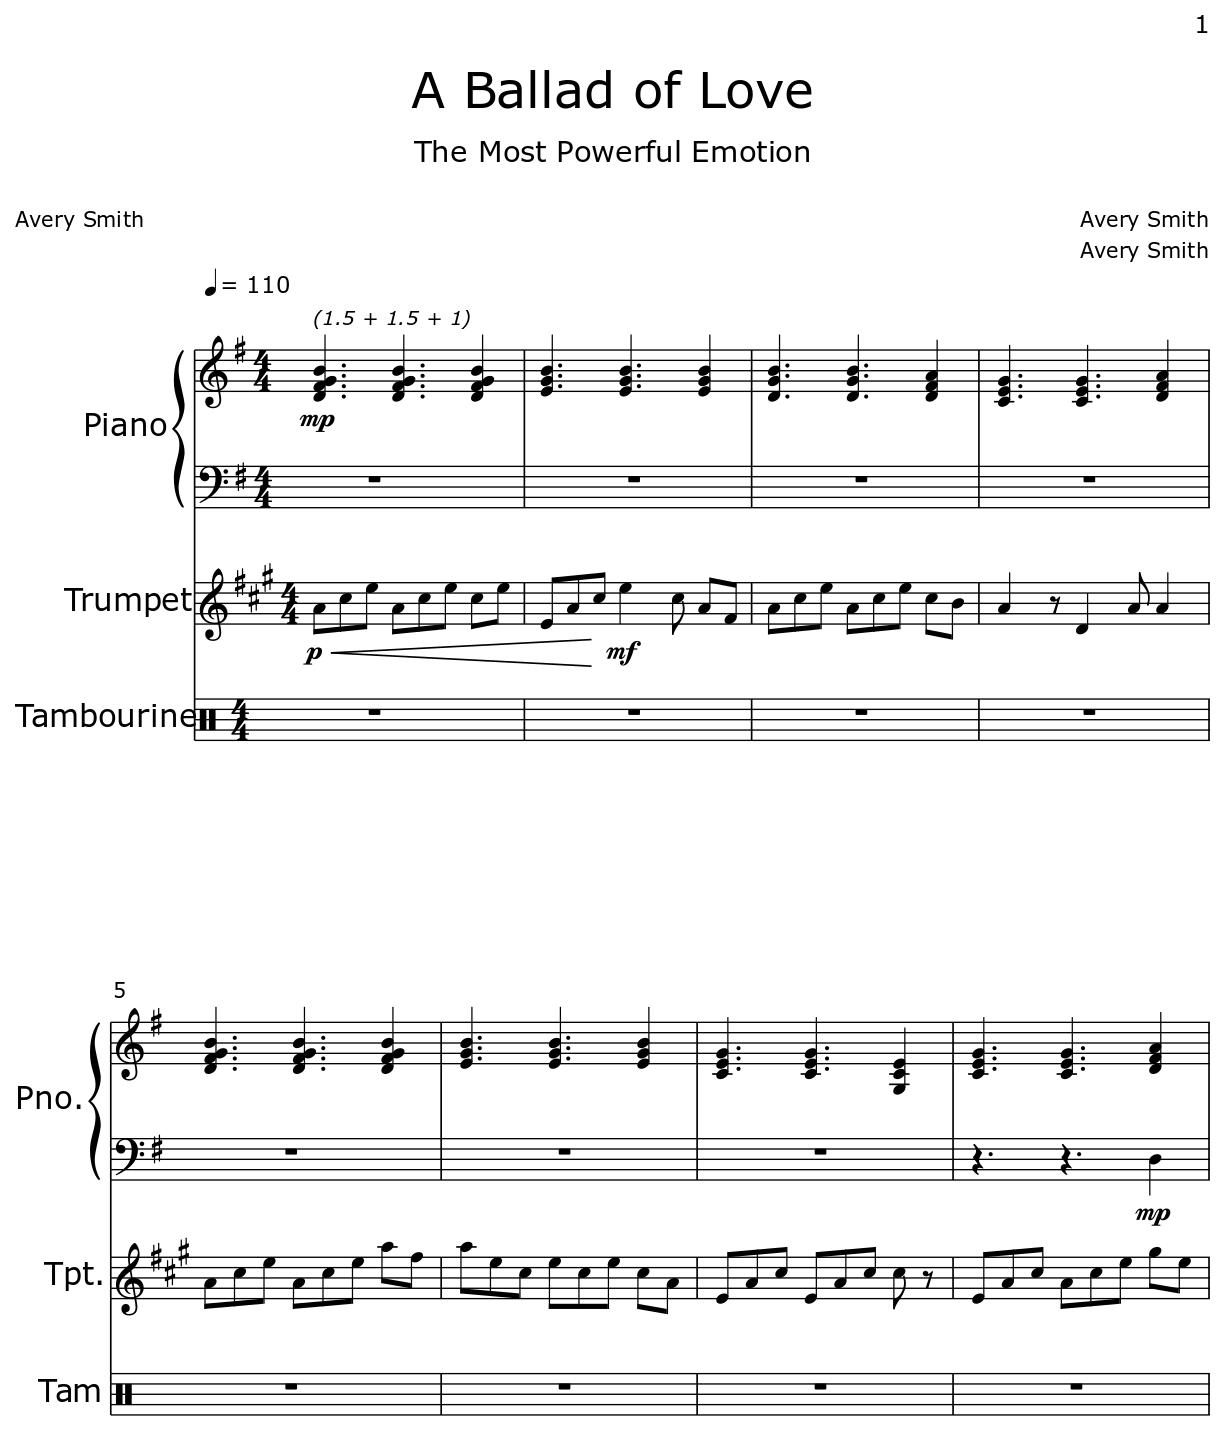 A Ballad of Love - Sheet music for Piano, Trumpet, Drum Set